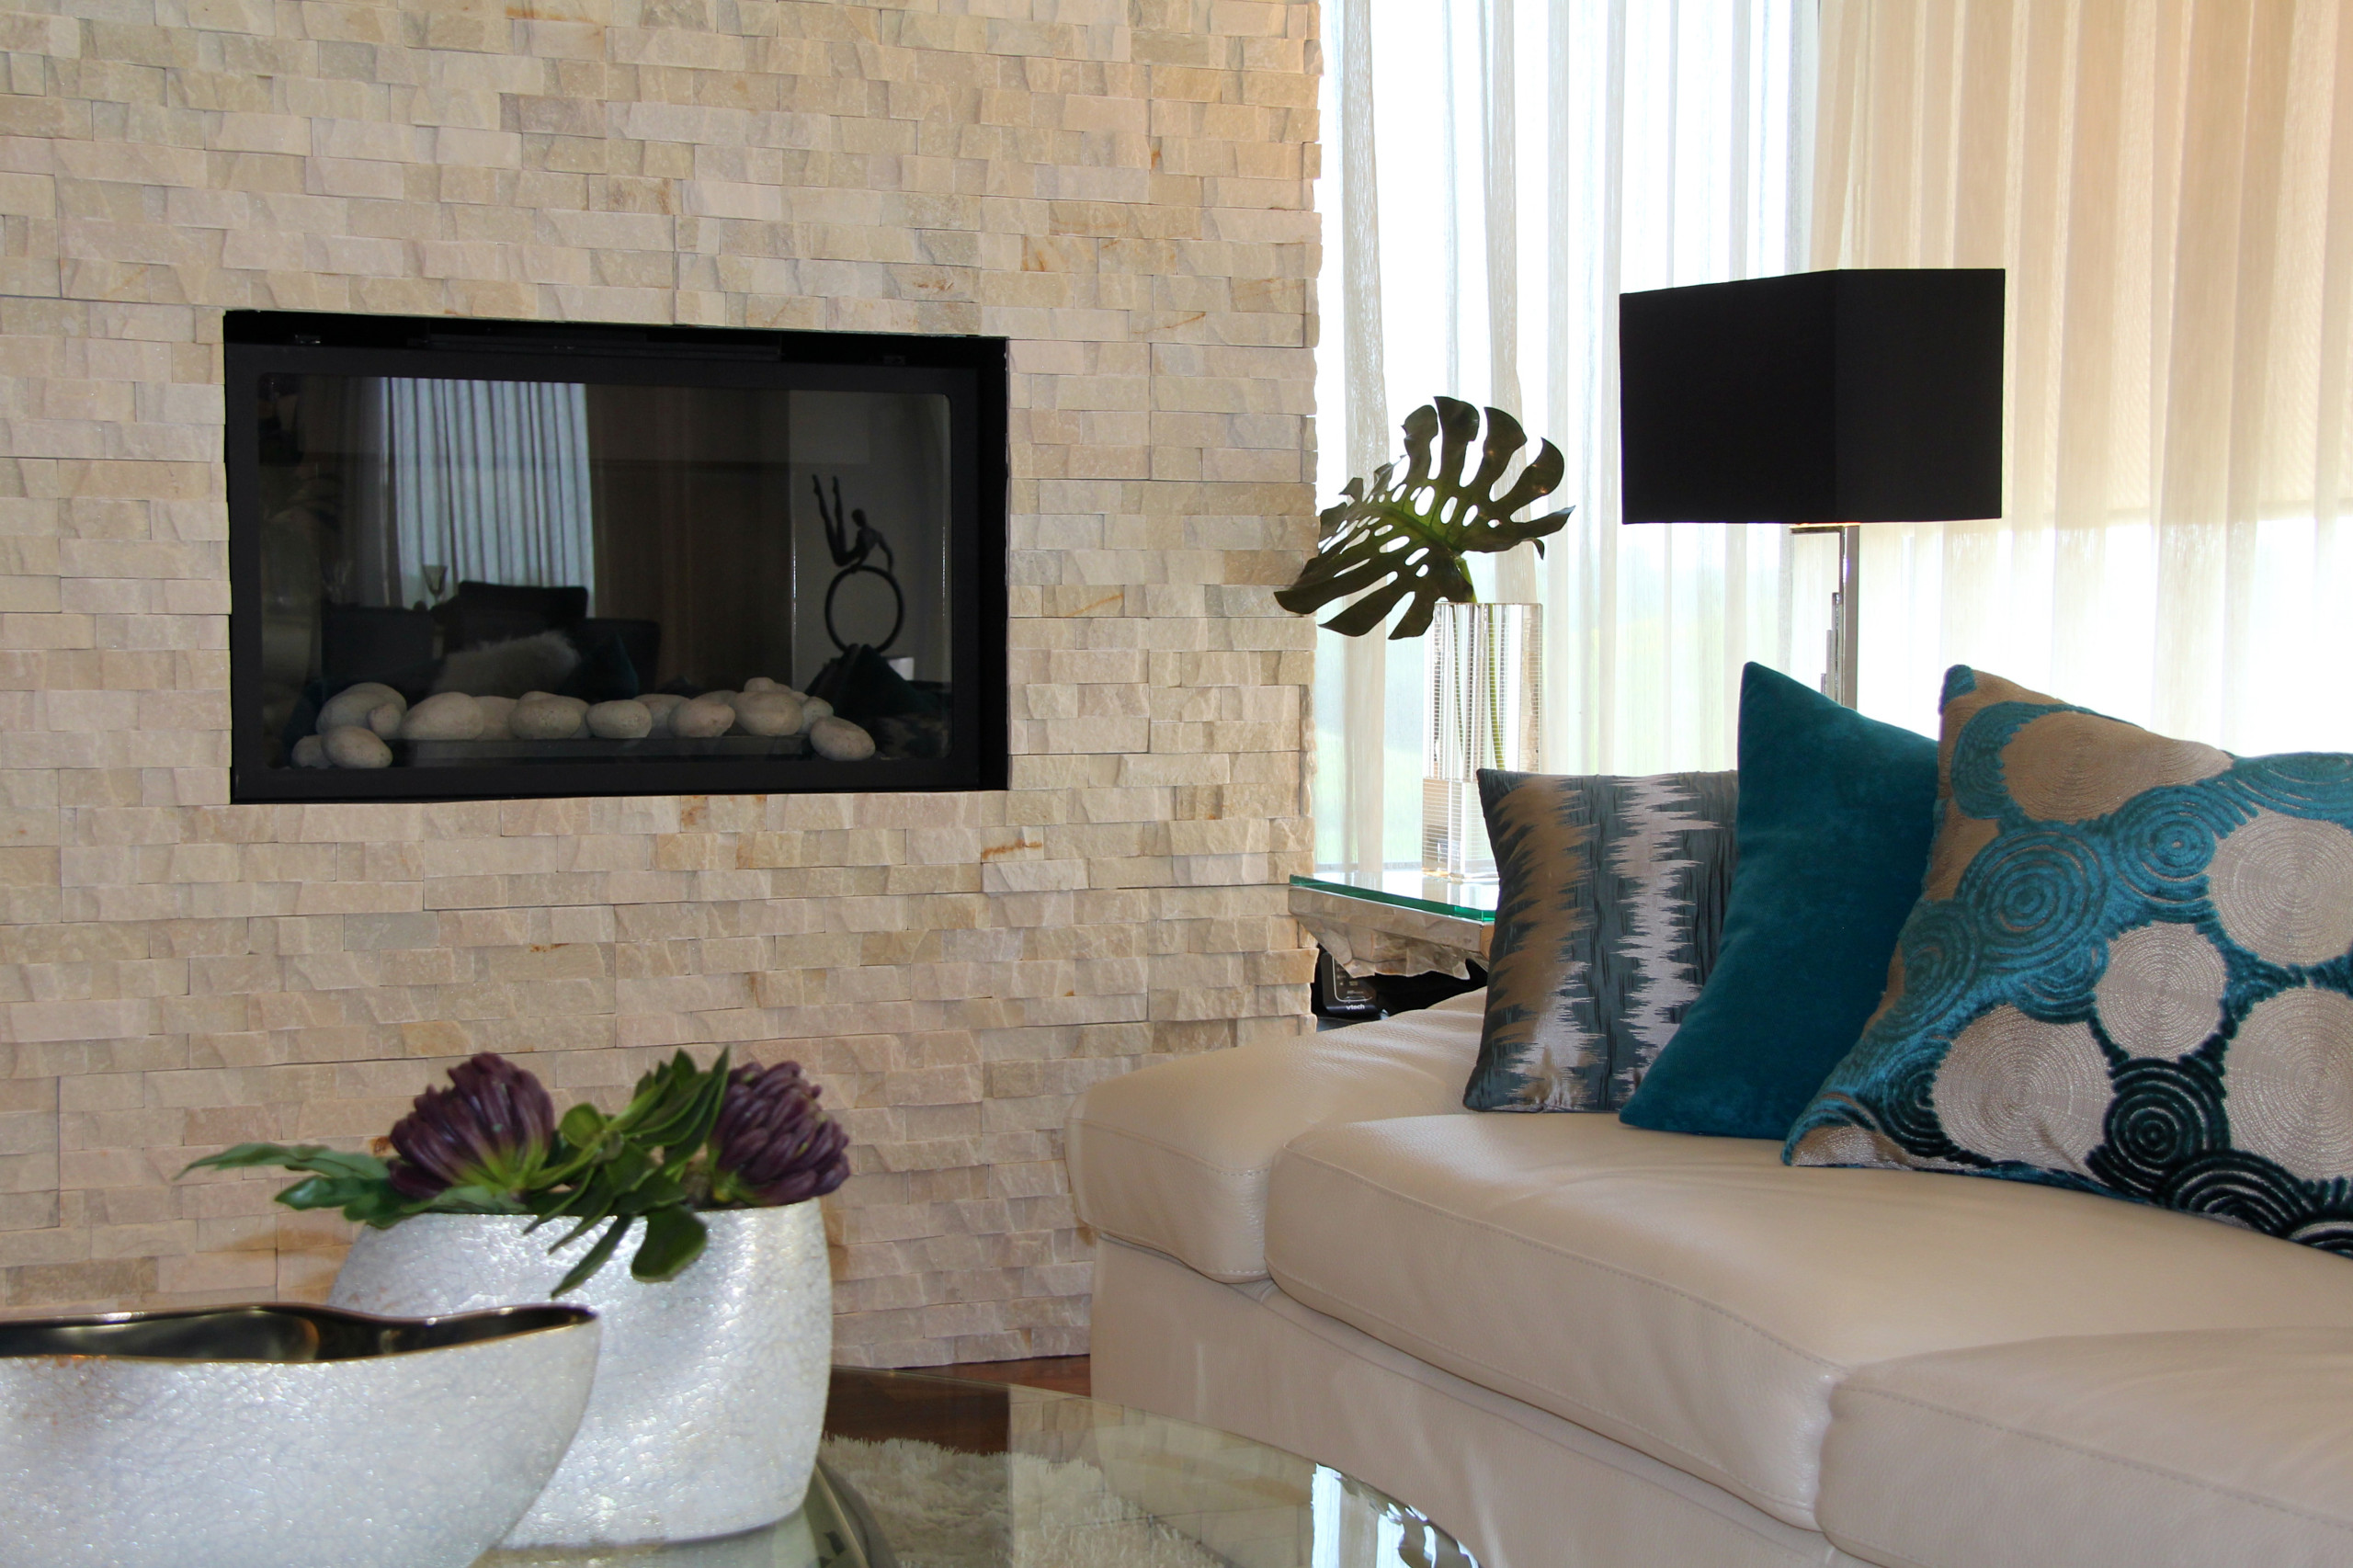 Boucherville Condo - Stylizing and Re-decorating